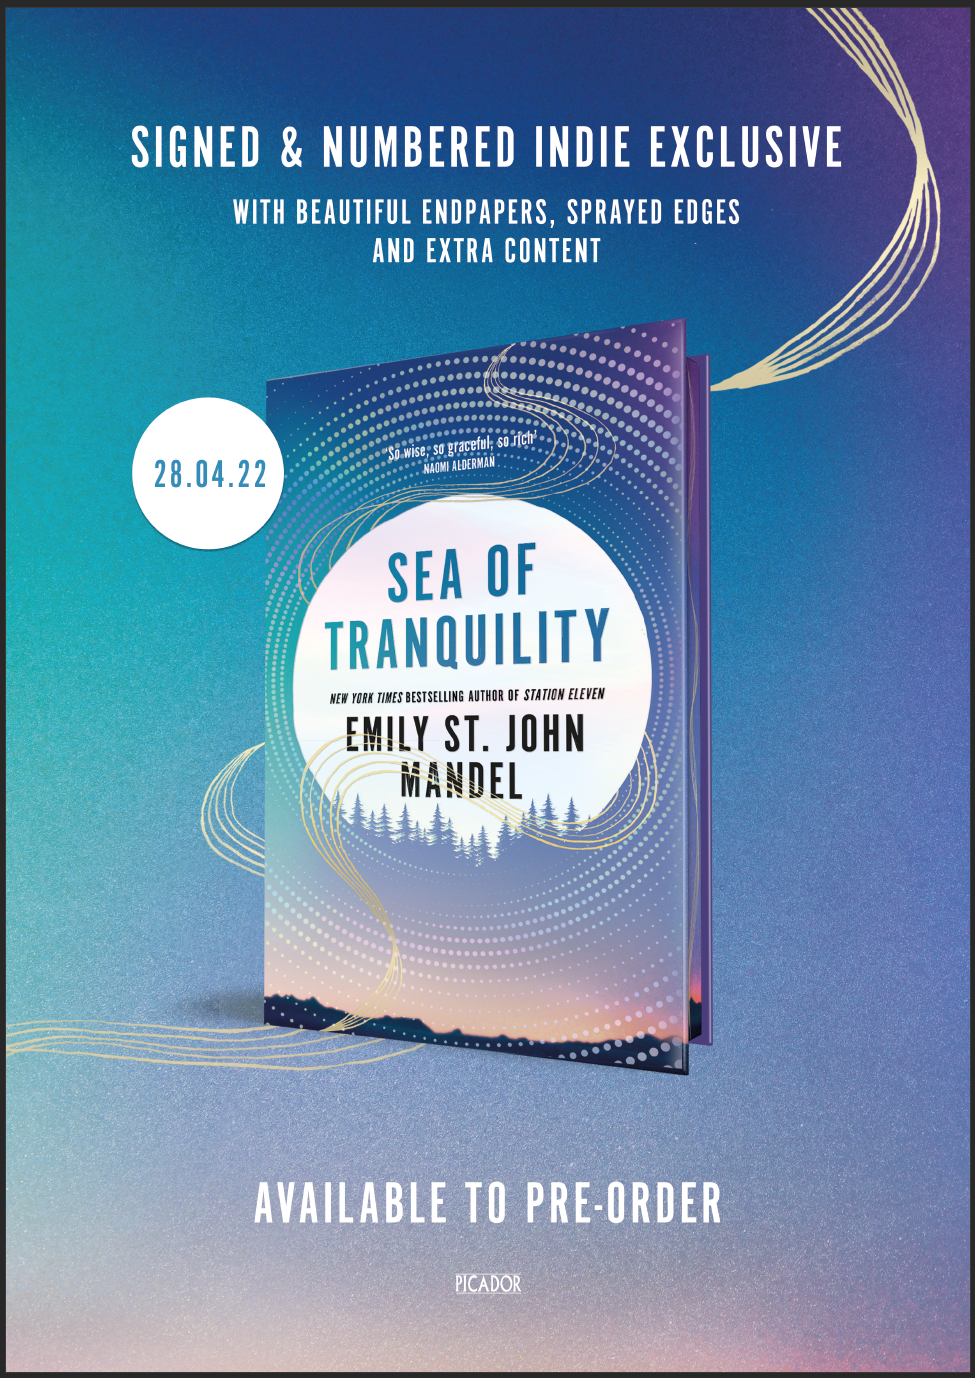 Sea of Tranquility Indie Exclusive Preorder Poster.PNG